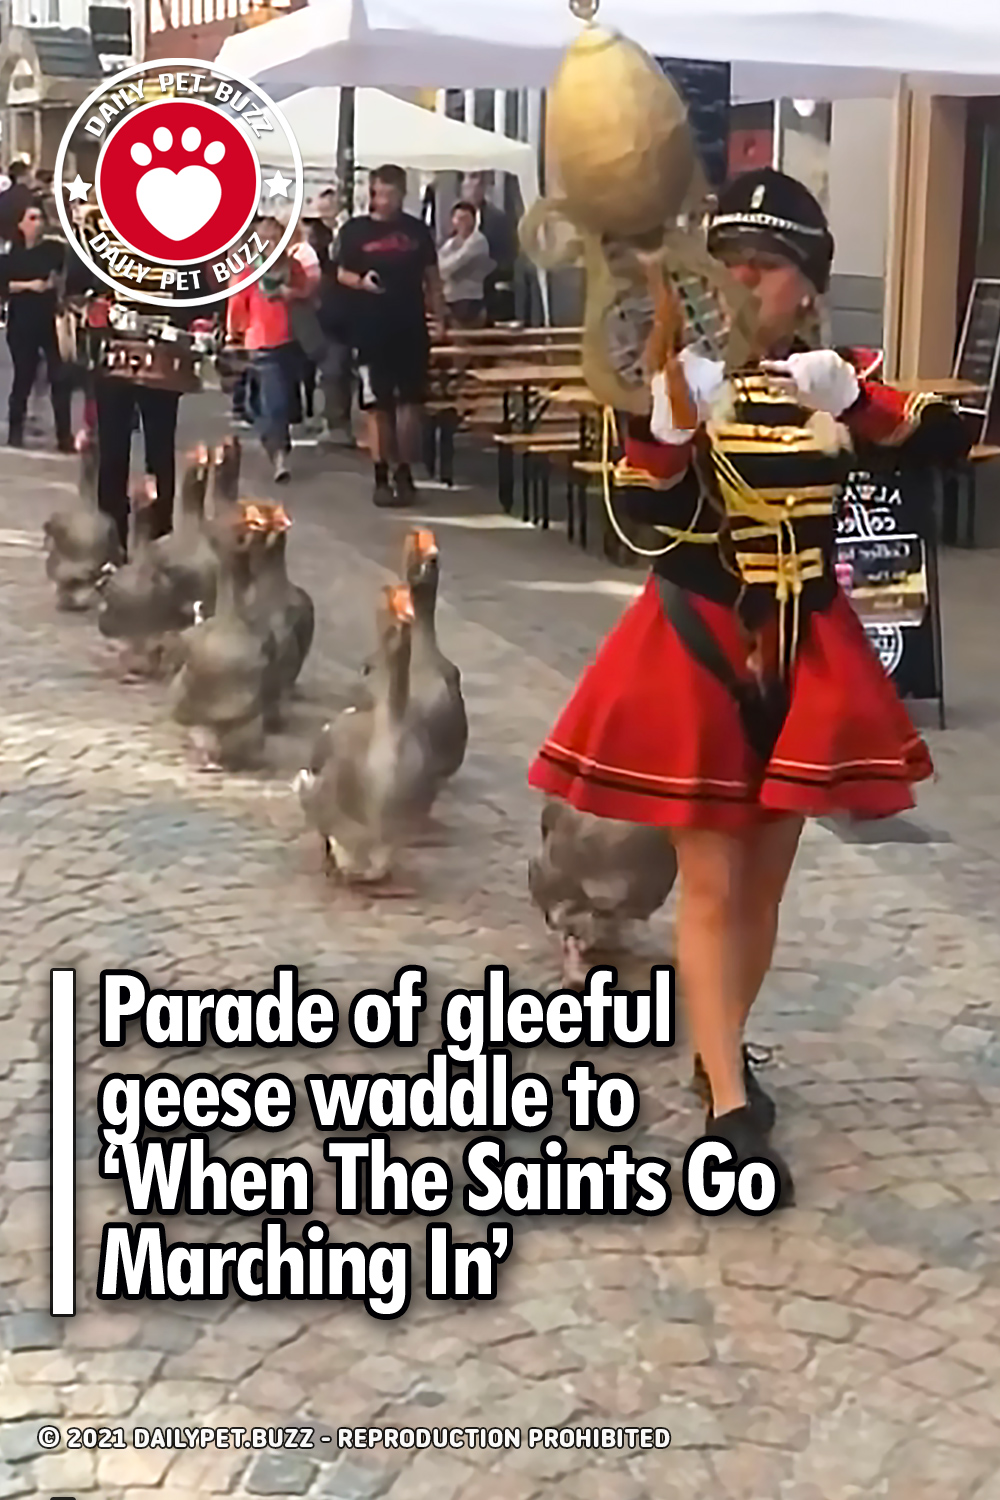 Parade of gleeful geese waddle to ‘When The Saints Go Marching In’